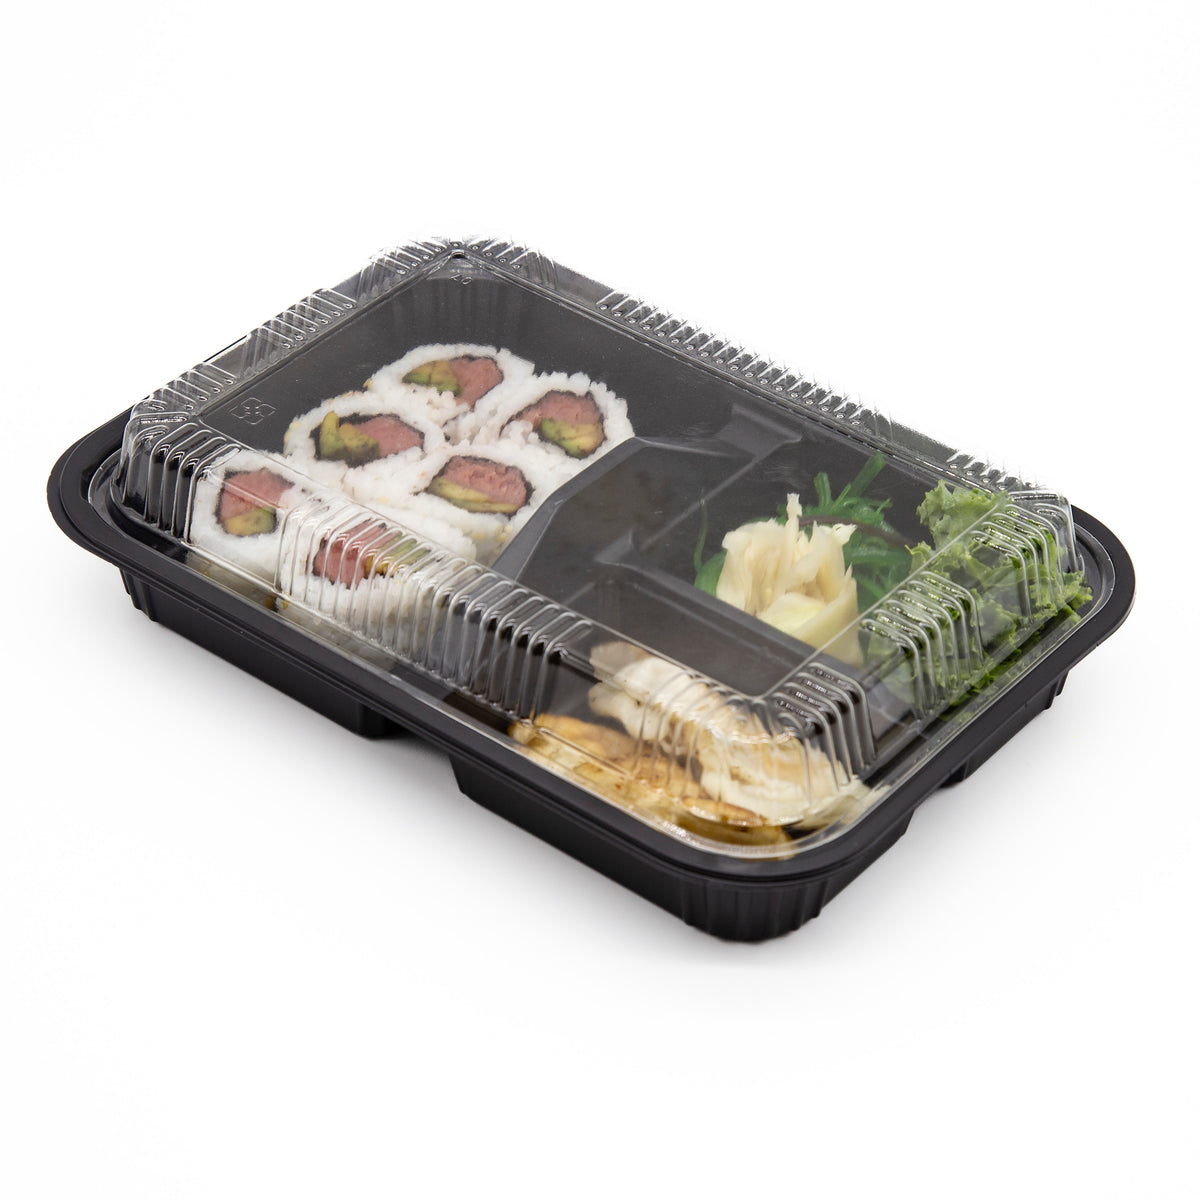 STI-304 3 Compartments PS Bento/Lunch Box Meal Prep Containers